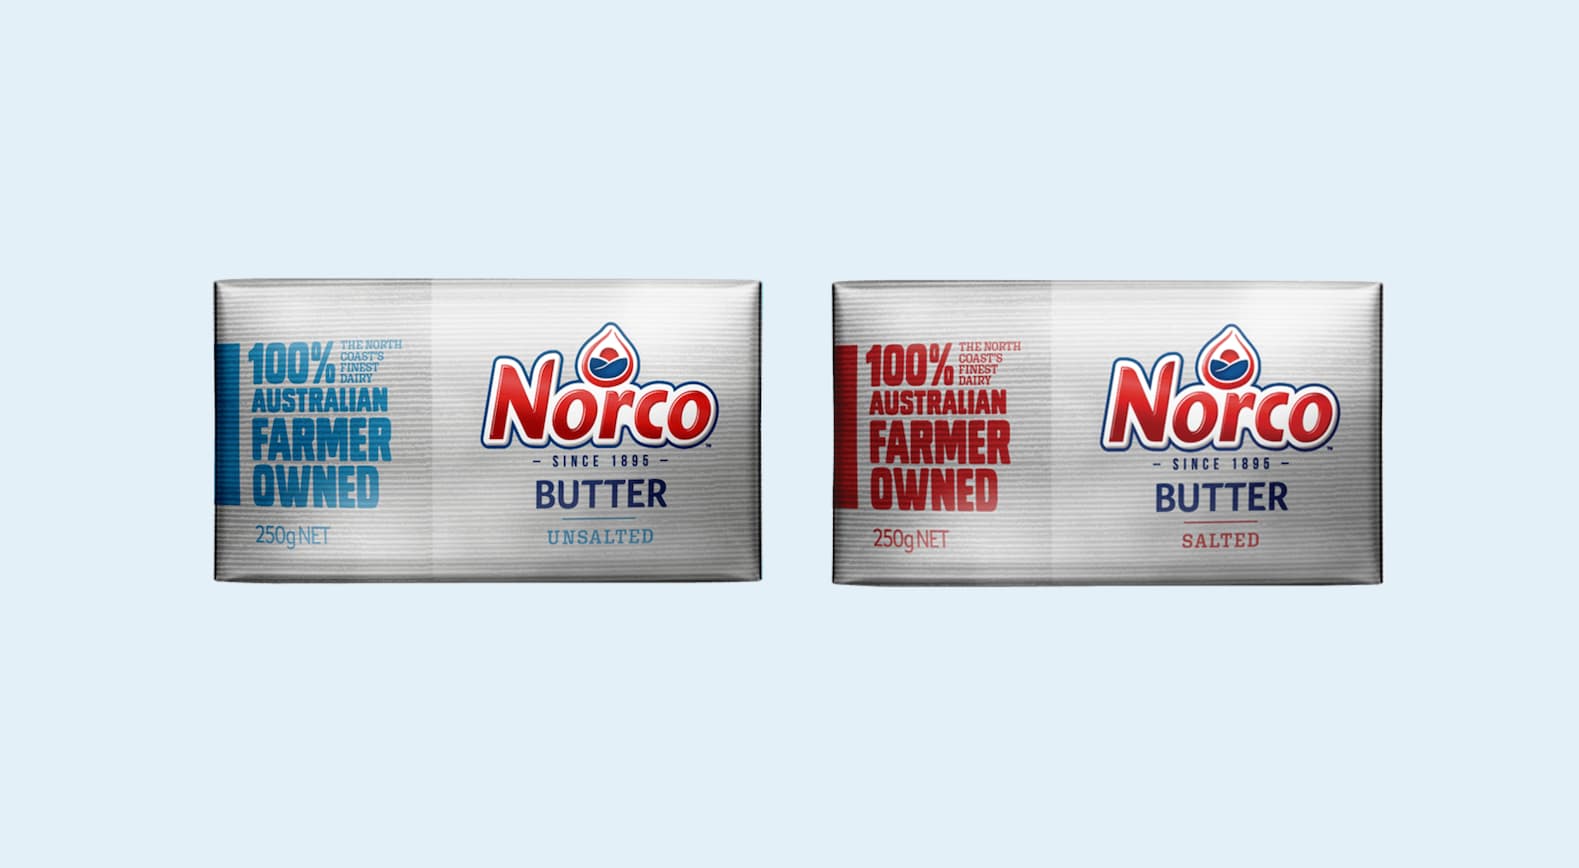 Norco butters